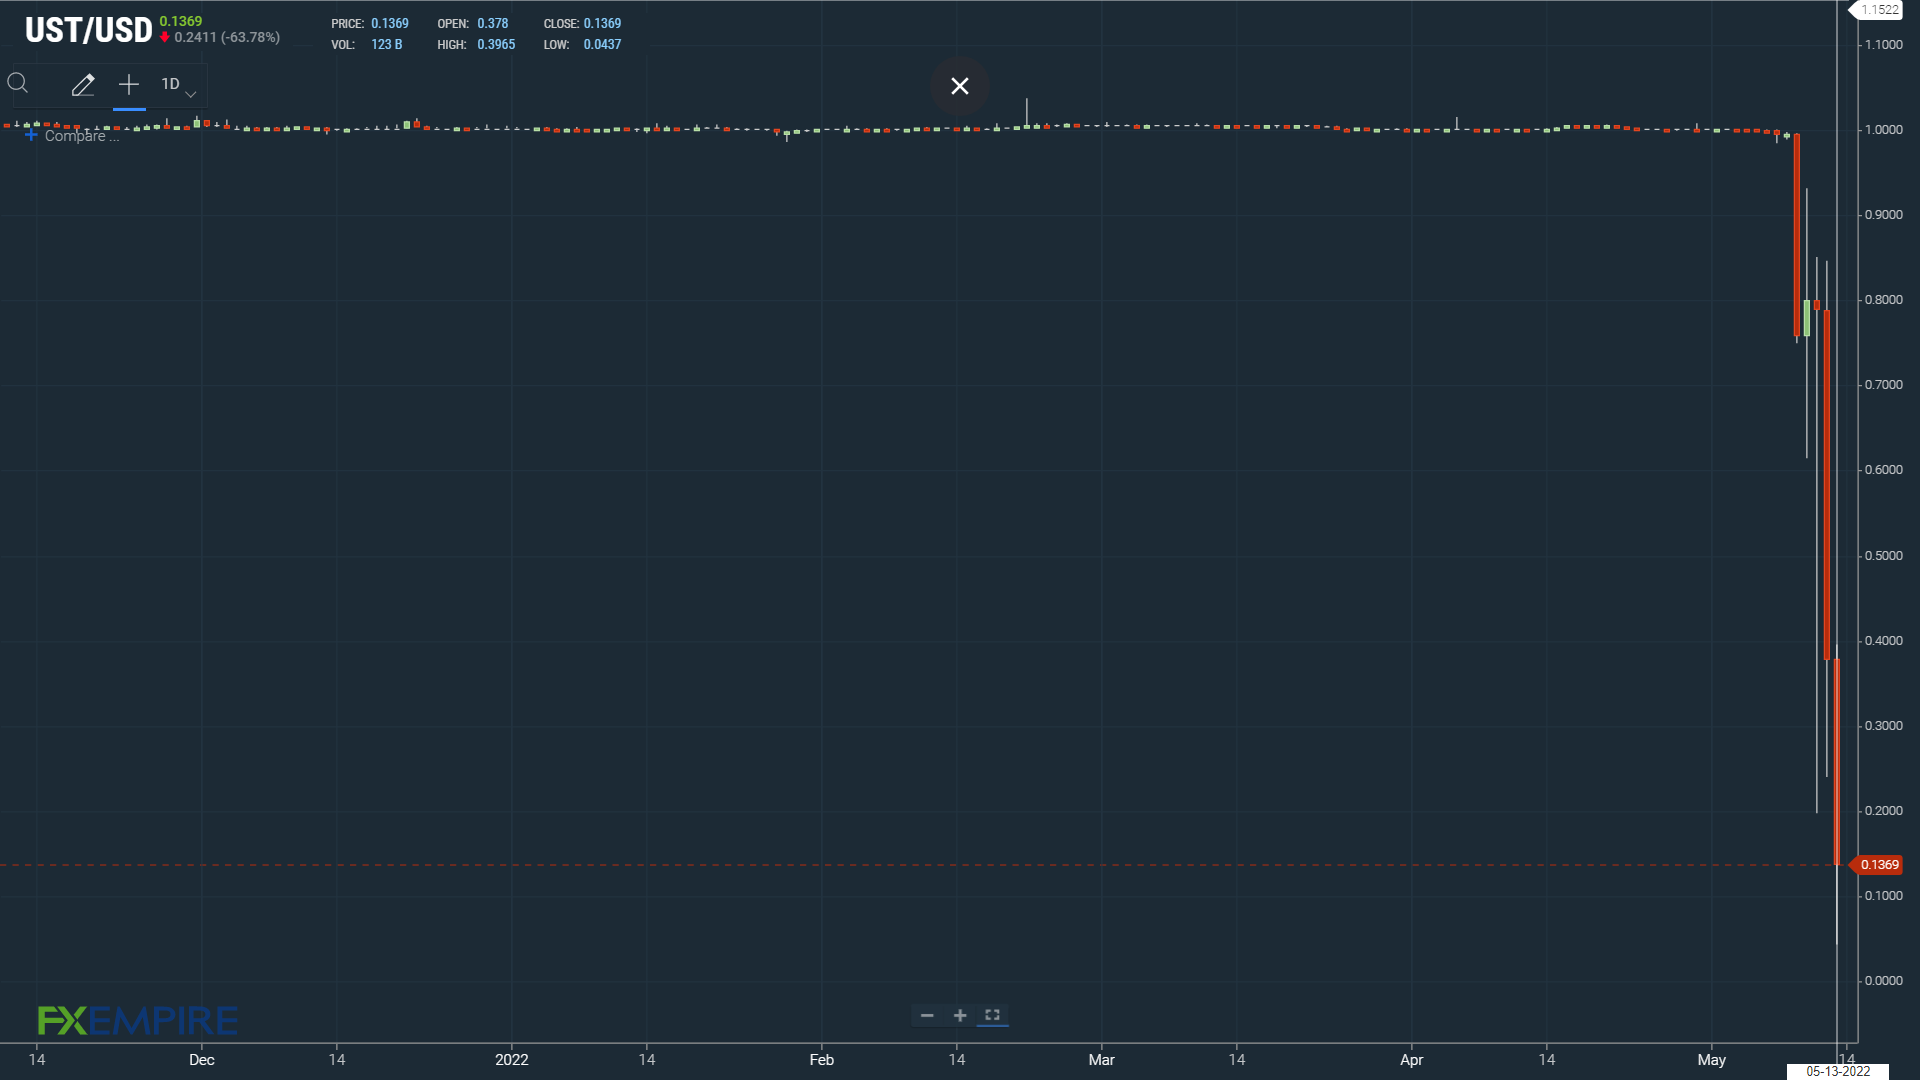 Stablecoin TerraUSD continues to slide.